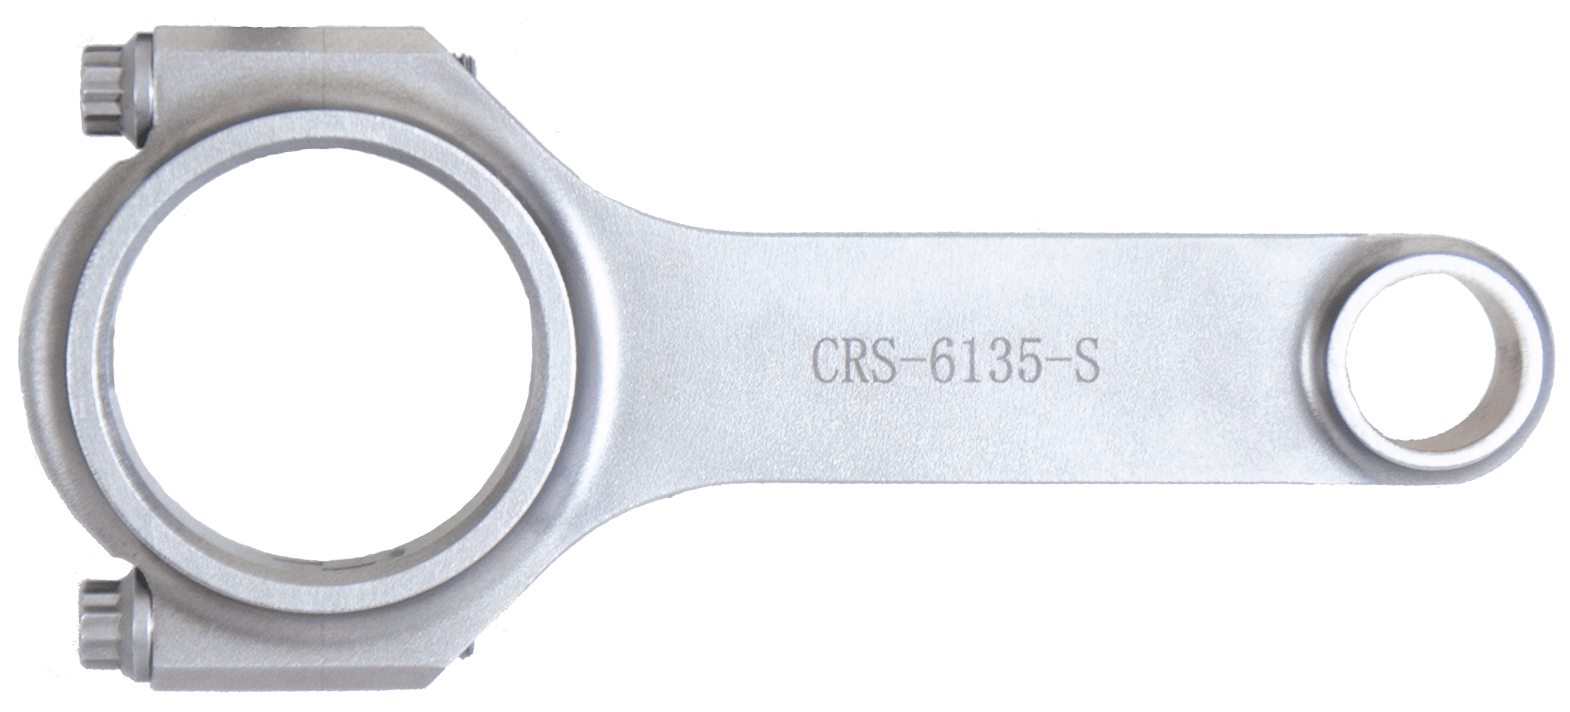 Eagle Specialty Products CRS61353D-1 Forged 4340 Steel H-Beam Connecting Rods